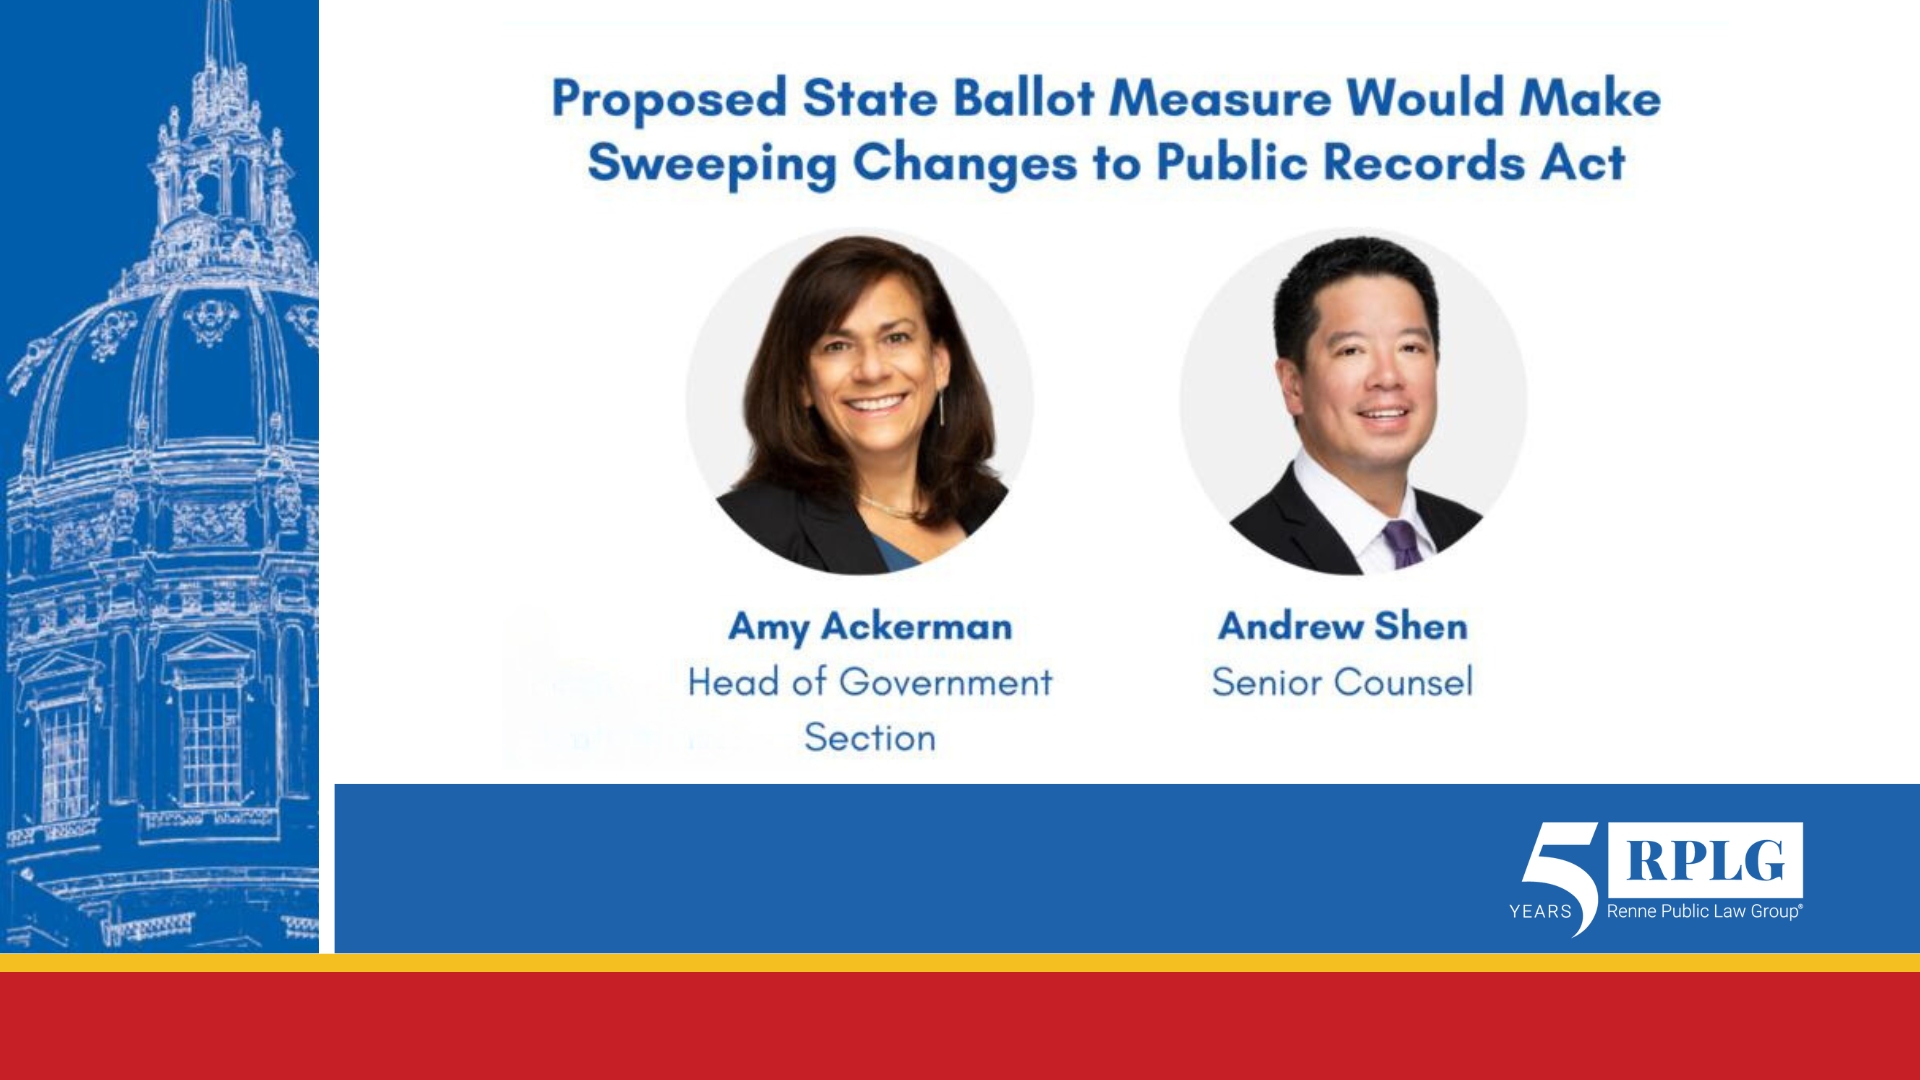 Proposed State Ballot Measure Would Make Sweeping Changes to Public Records Act